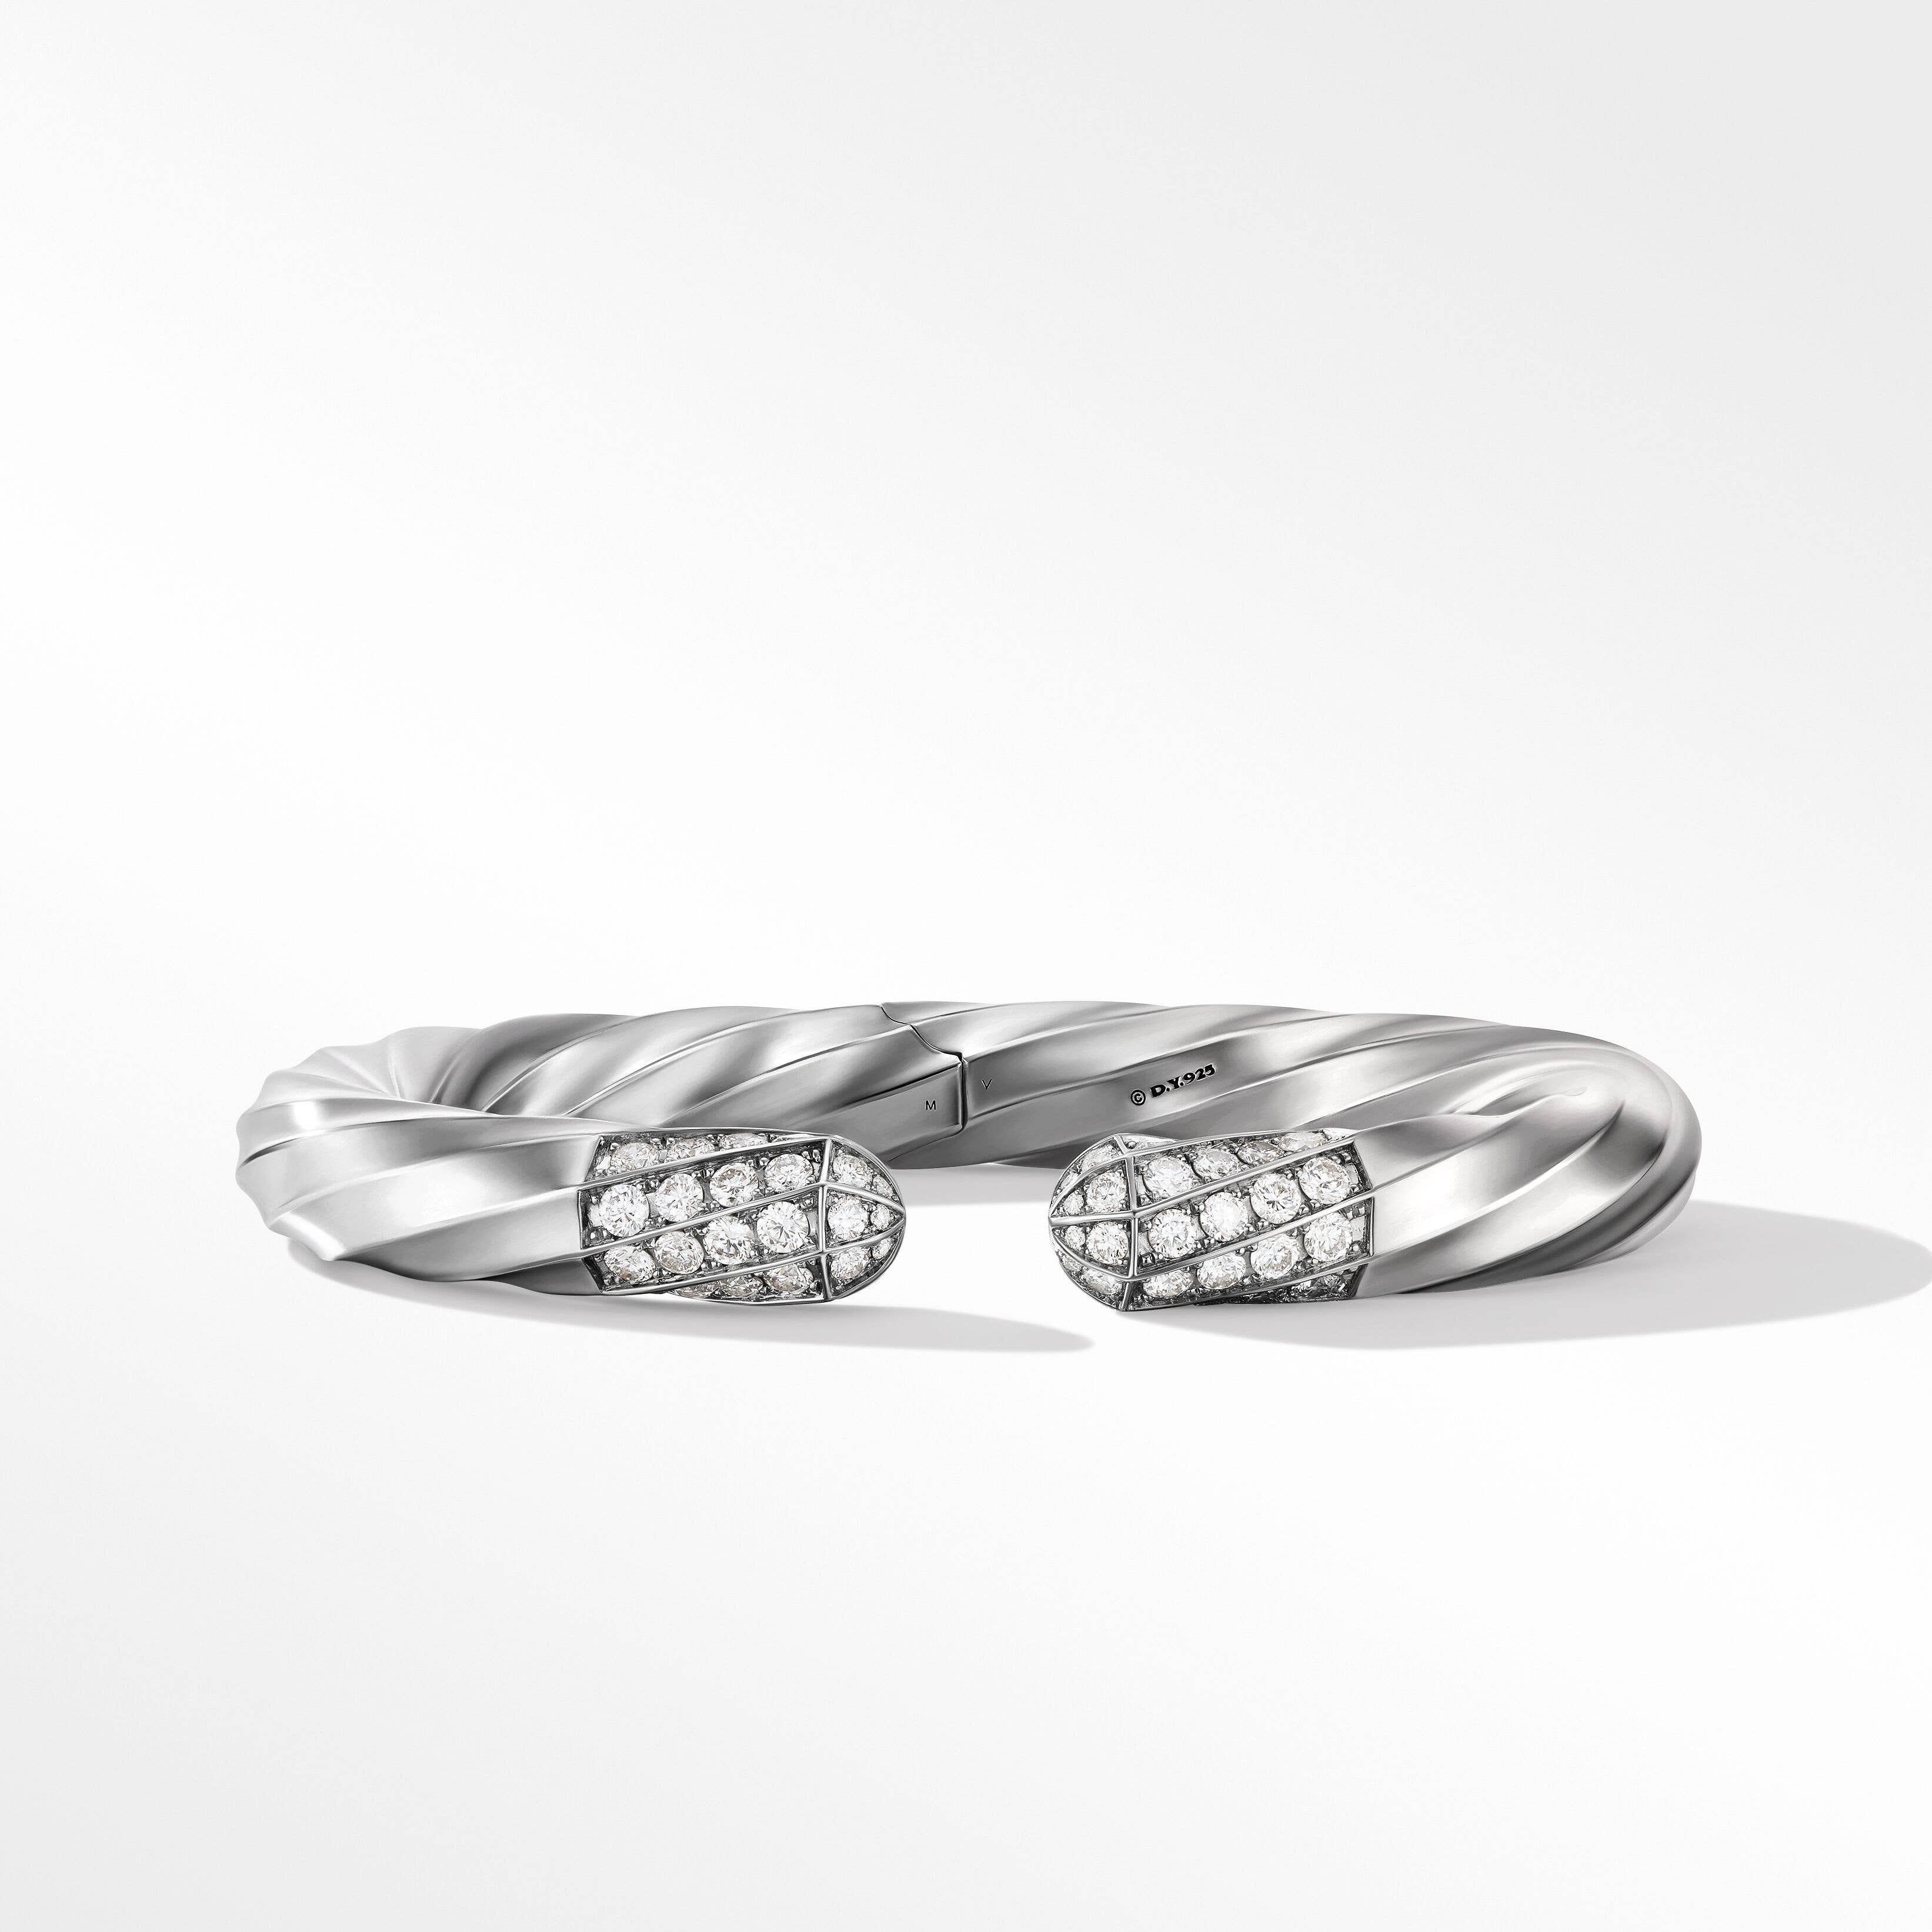 Cable Edge™ Bracelet in Recycled Sterling Silver with Pavé Diamonds